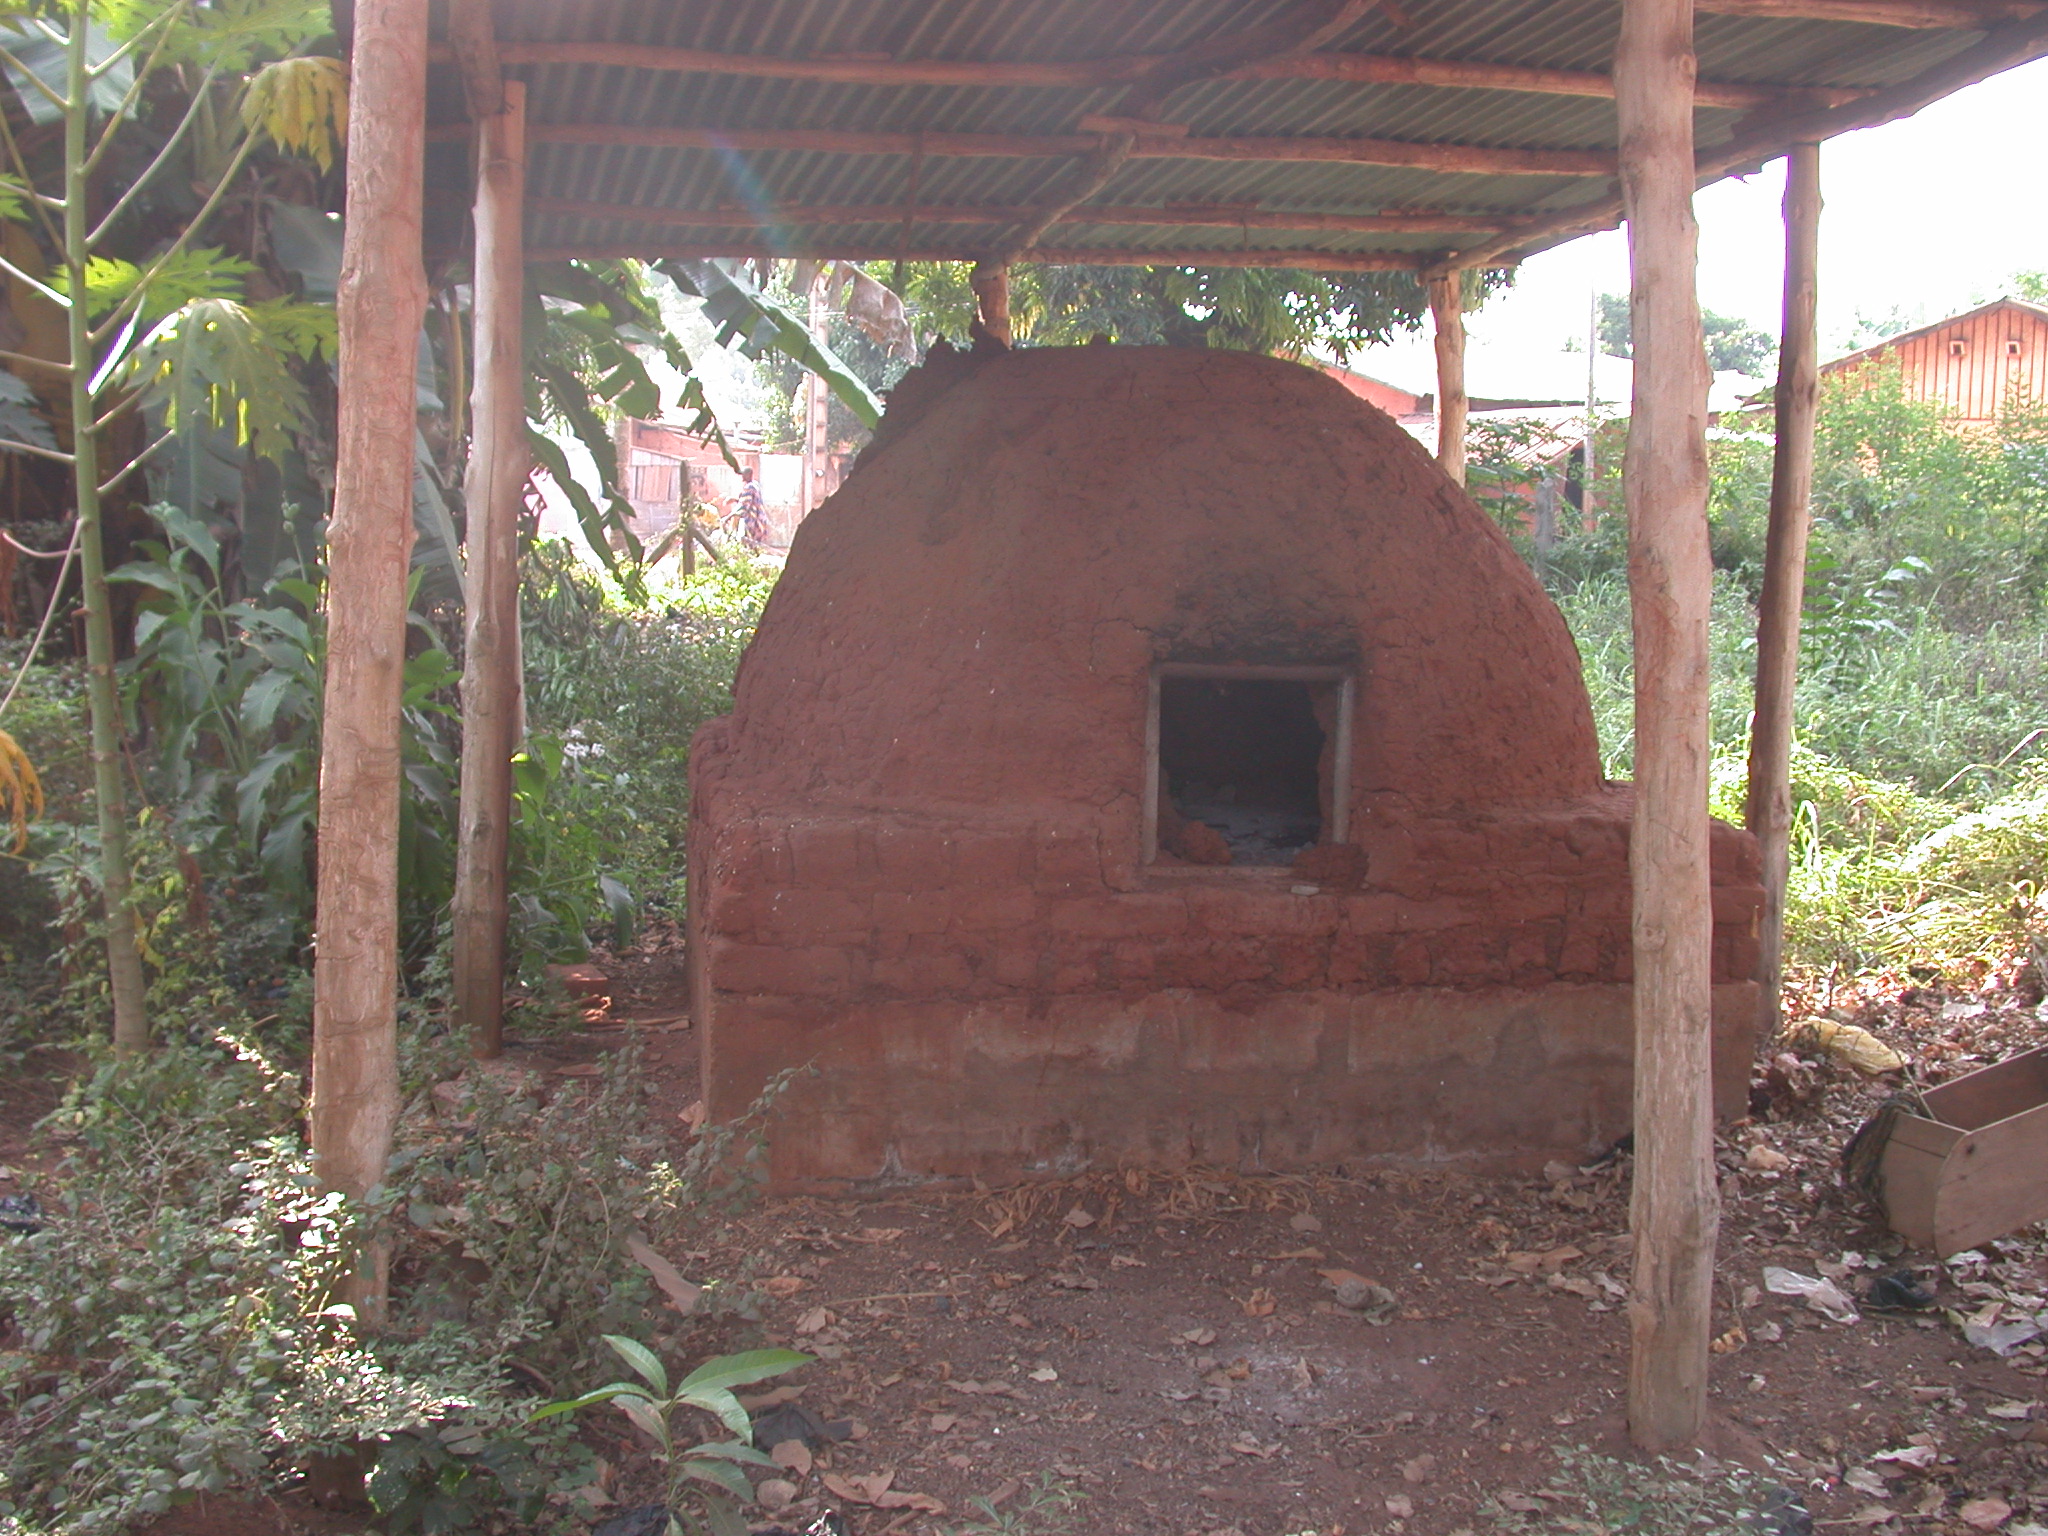 Oven Used to Bake Bread, Abomey, Benin